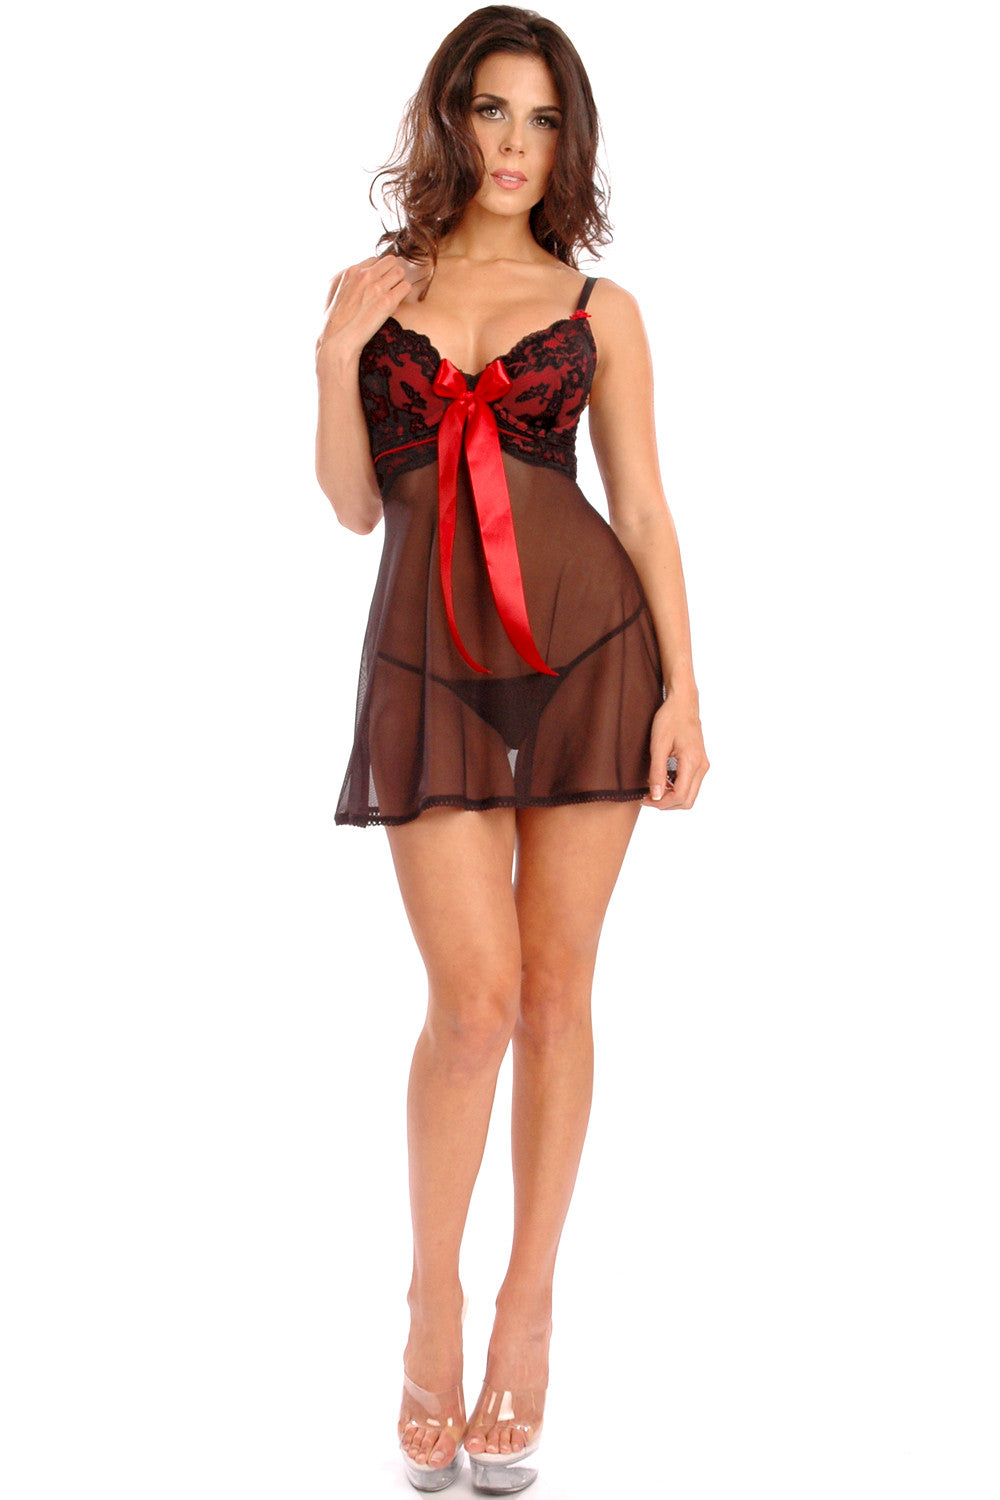 Fleurette Underwire Molded Cup Babydoll